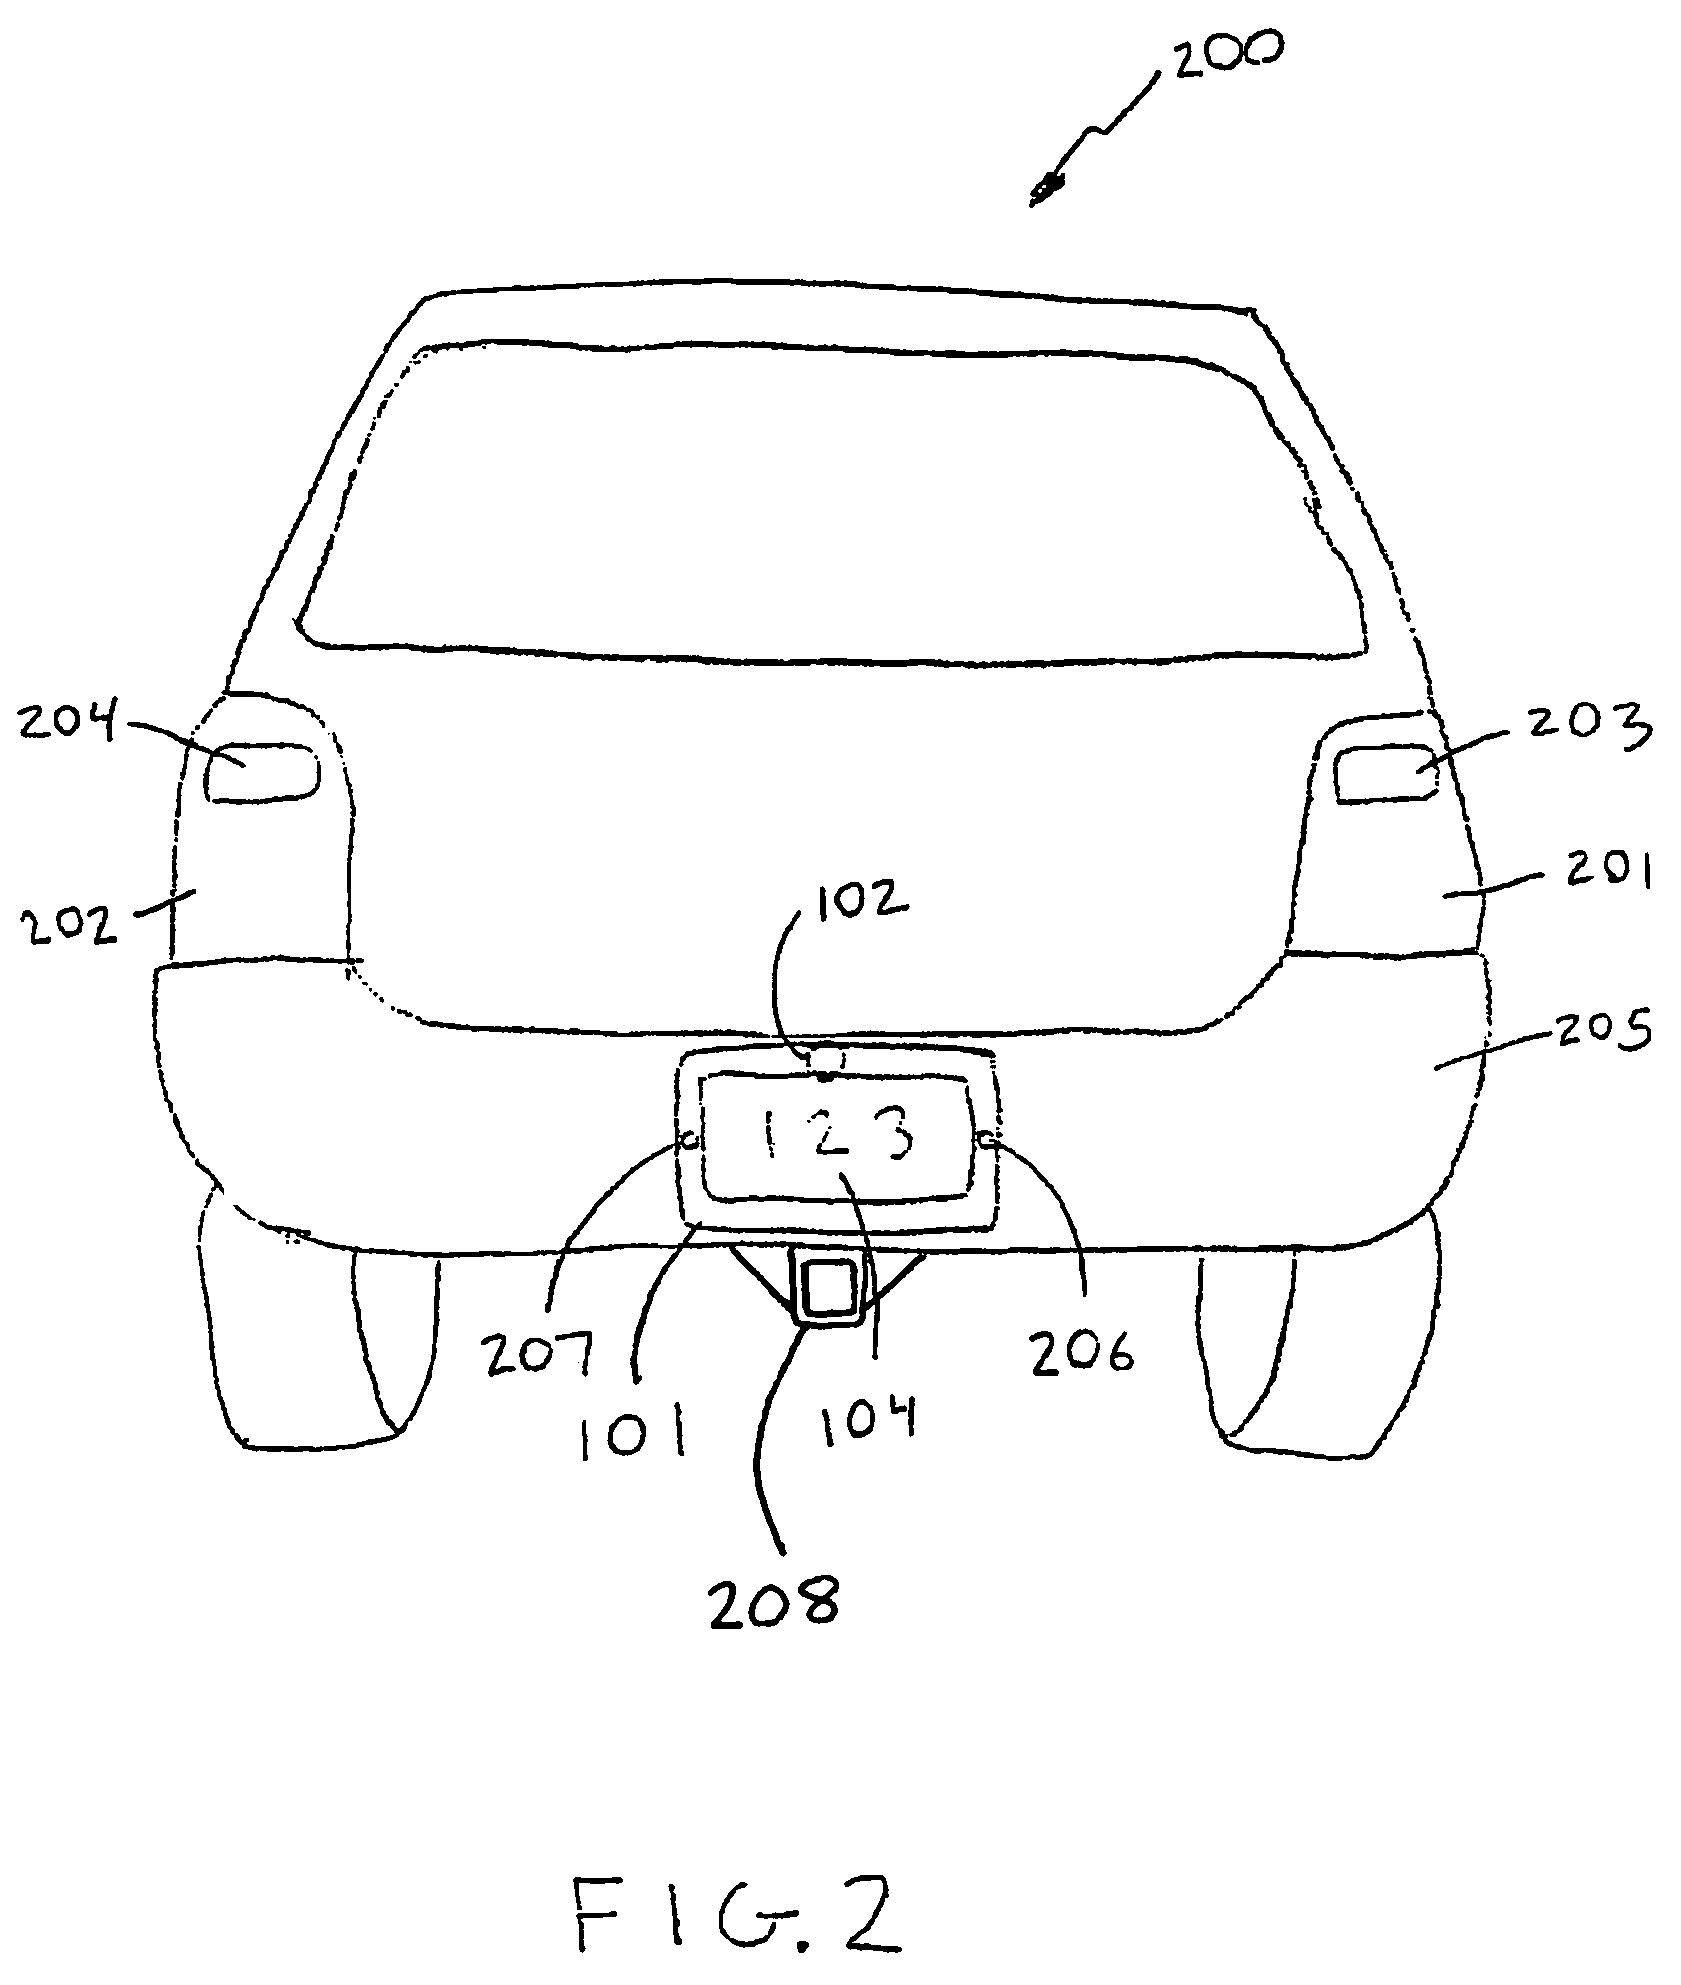 Vehicle back-up viewing system